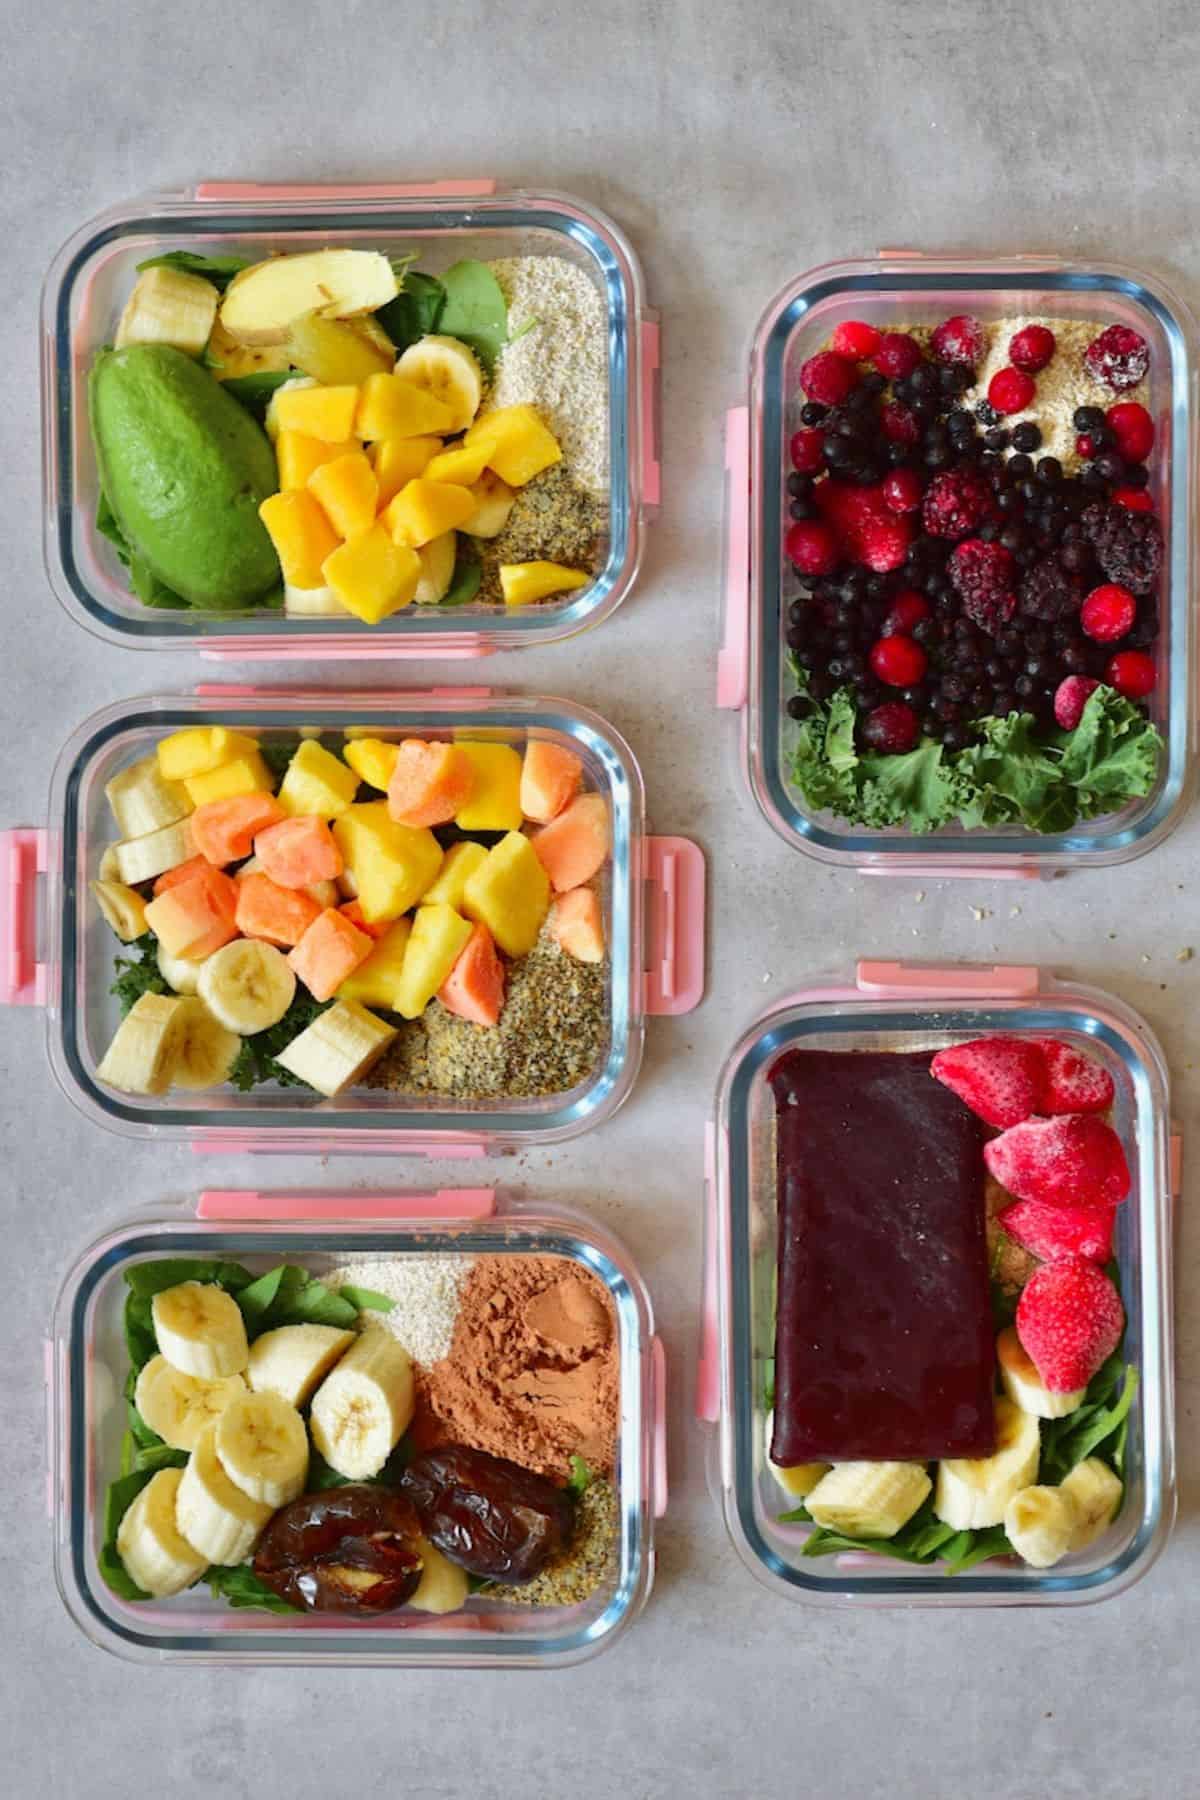 How to meal prep - Smoothies meal prep